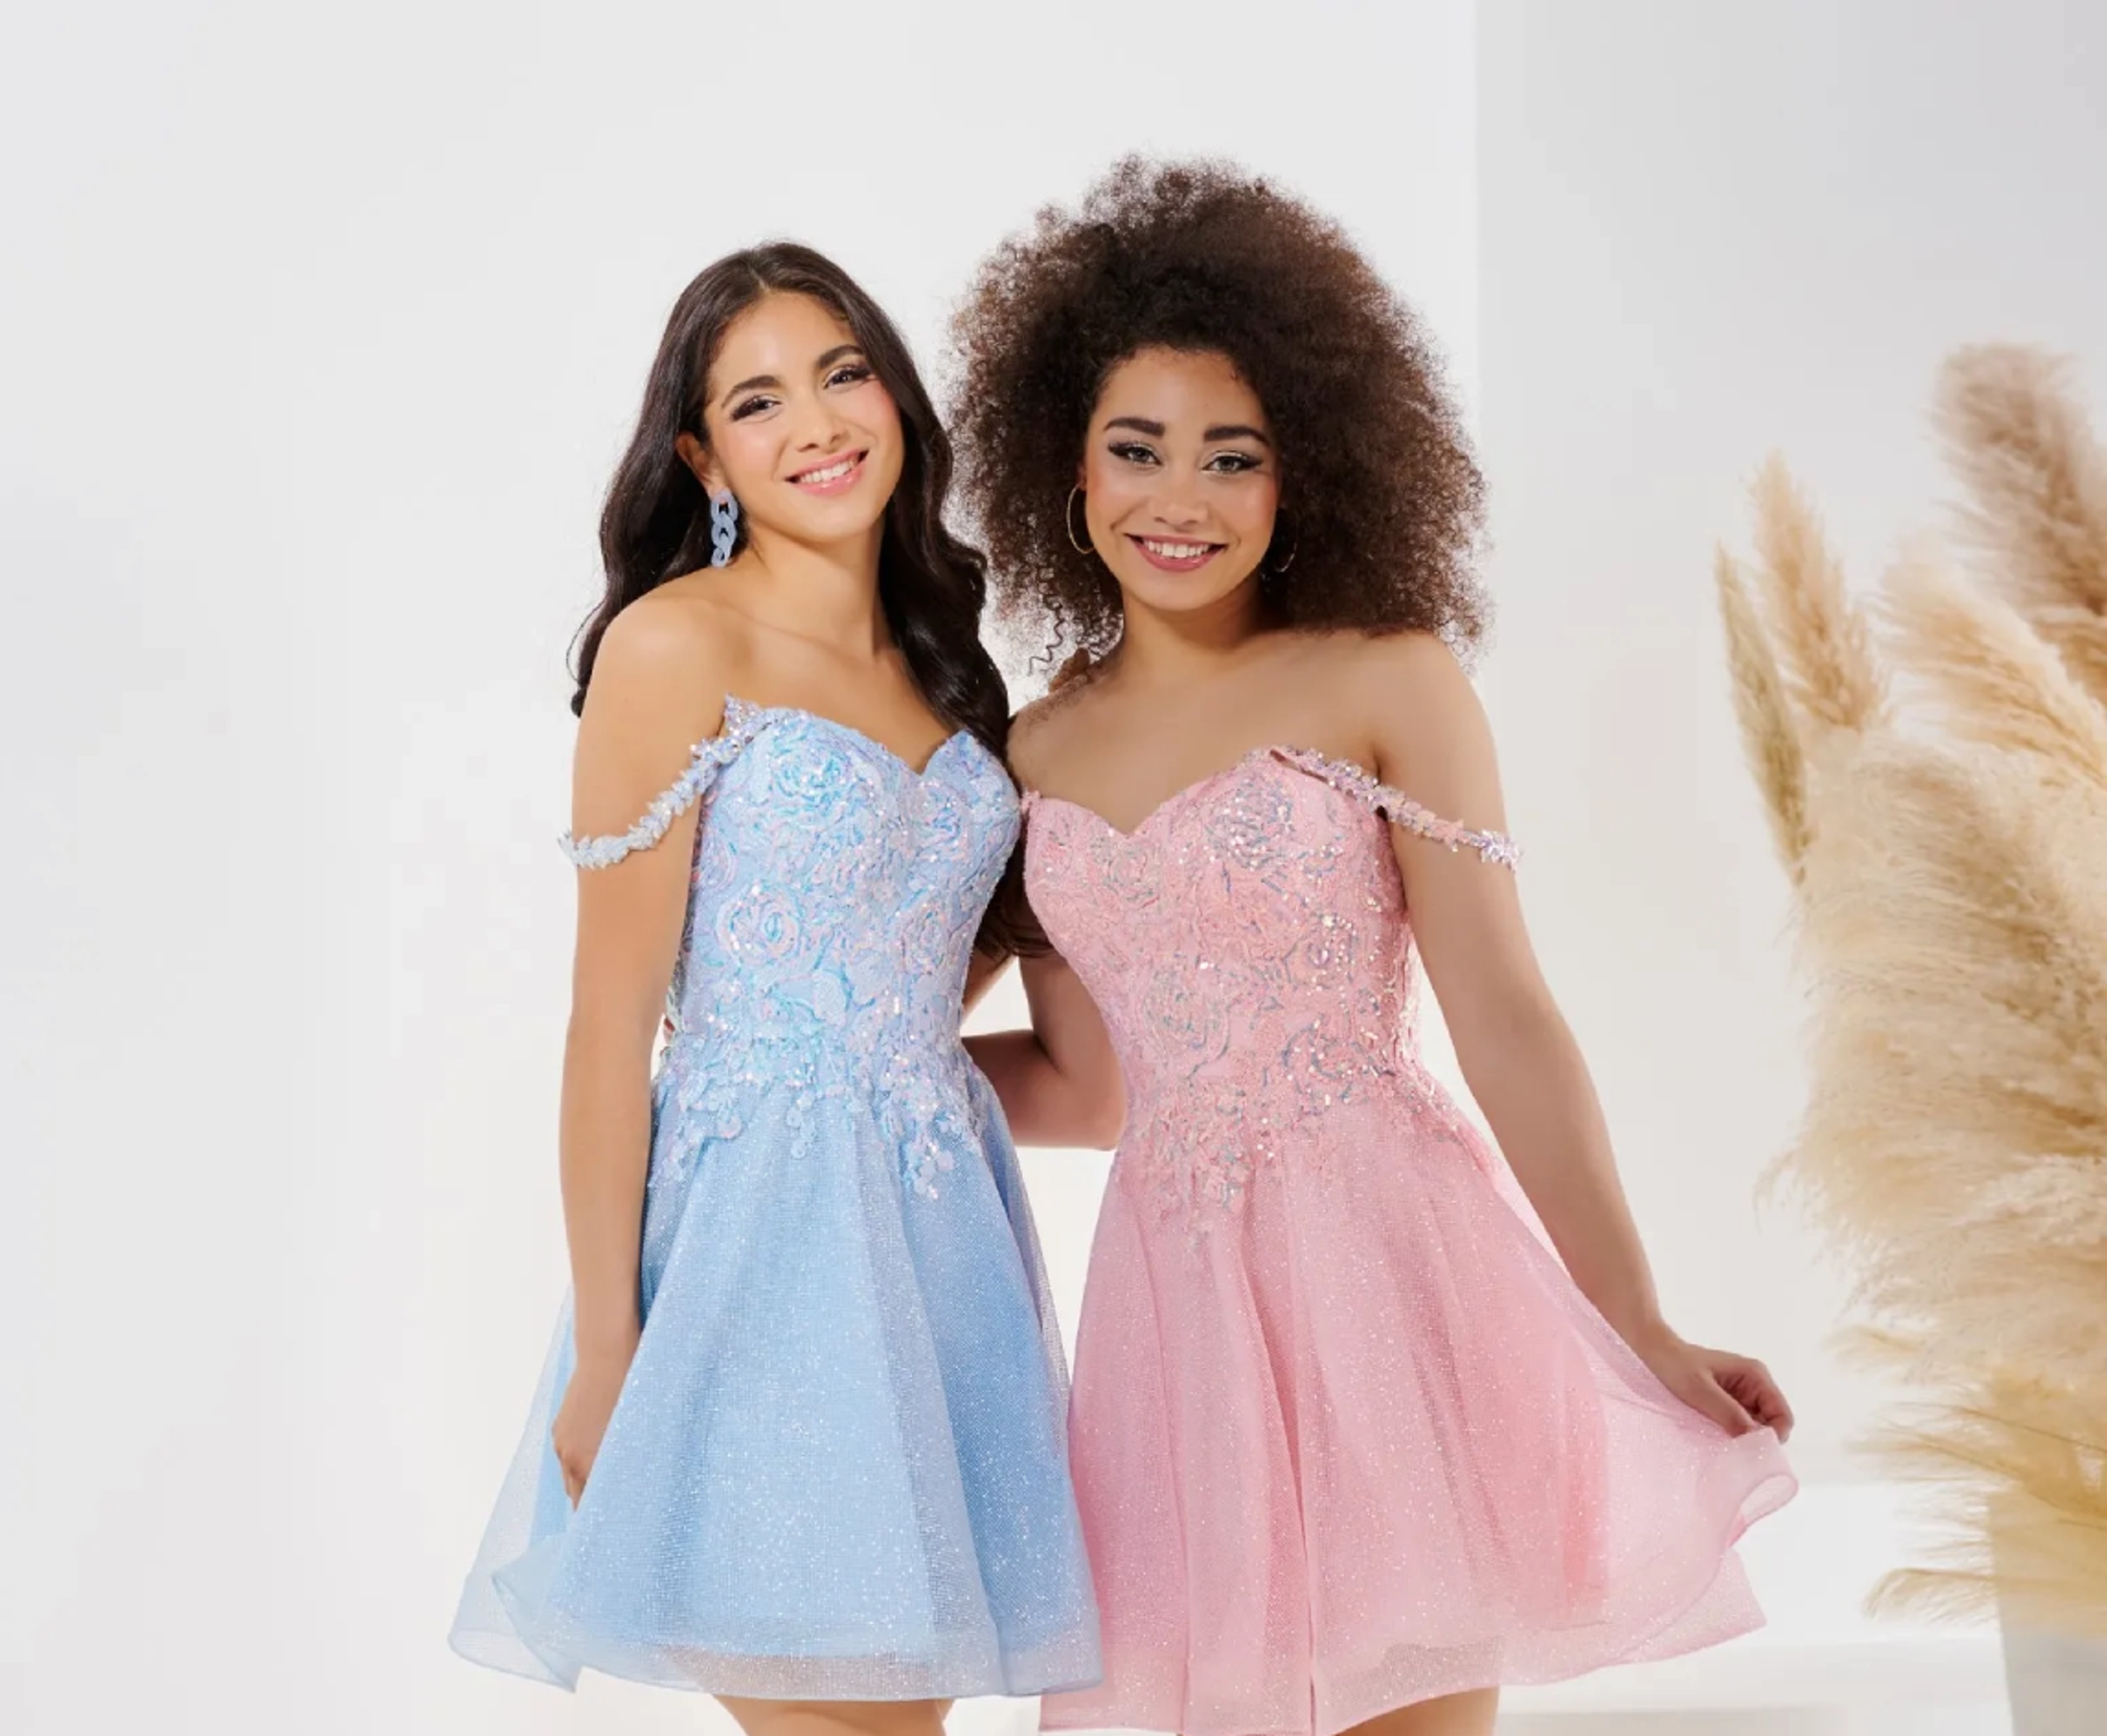 Models wearing a homecoming dresses. Mobile image